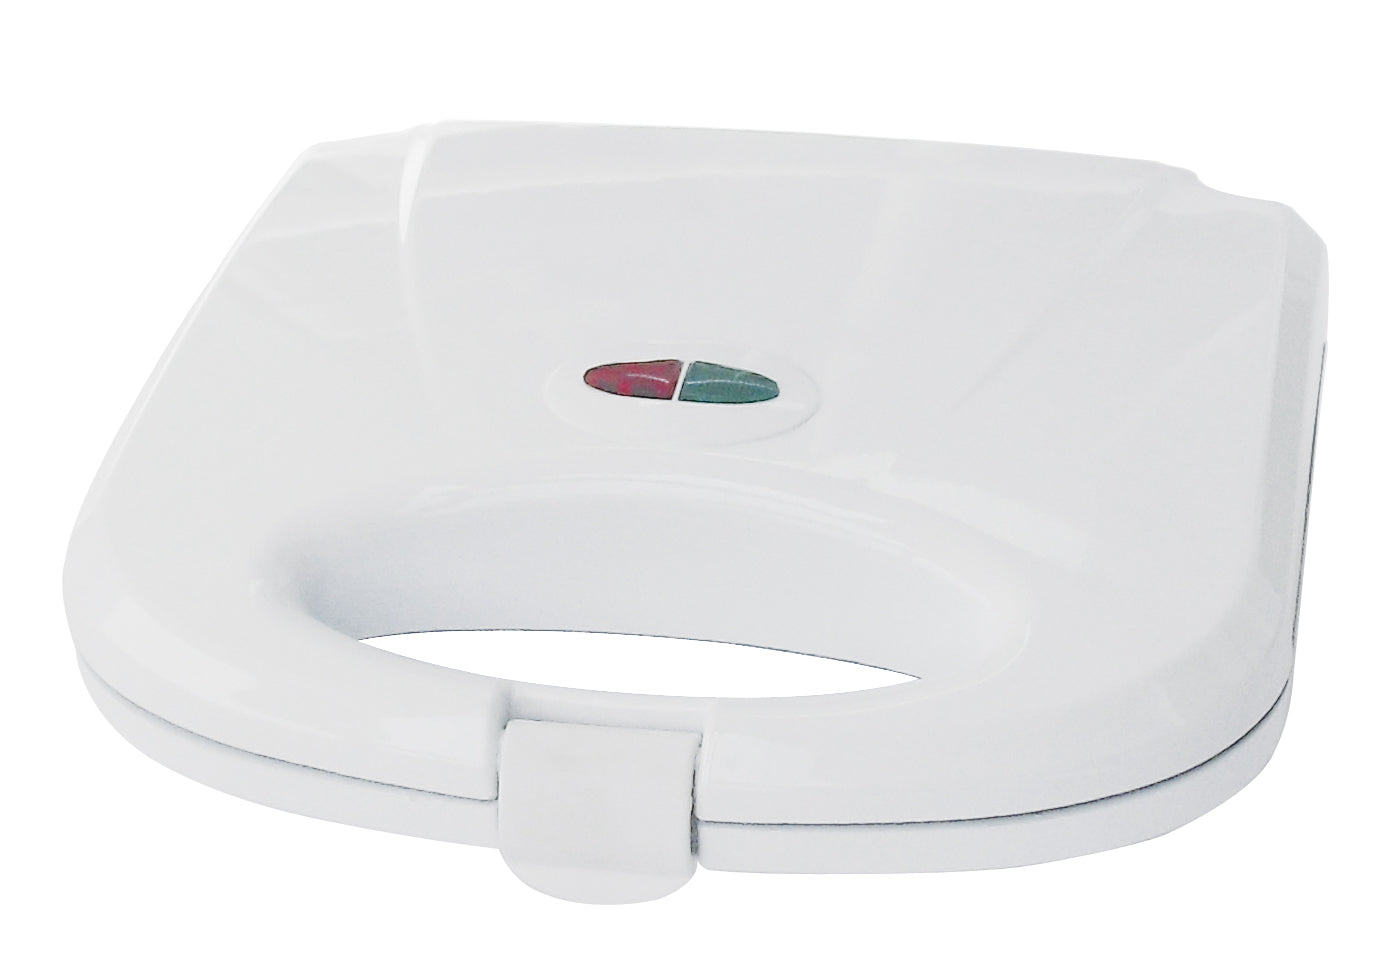 
                  
                    Bene Casa white cool touch sandwich maker, nonstick sandwich maker, automatic sandwich maker, compact storage and locking lid
                  
                